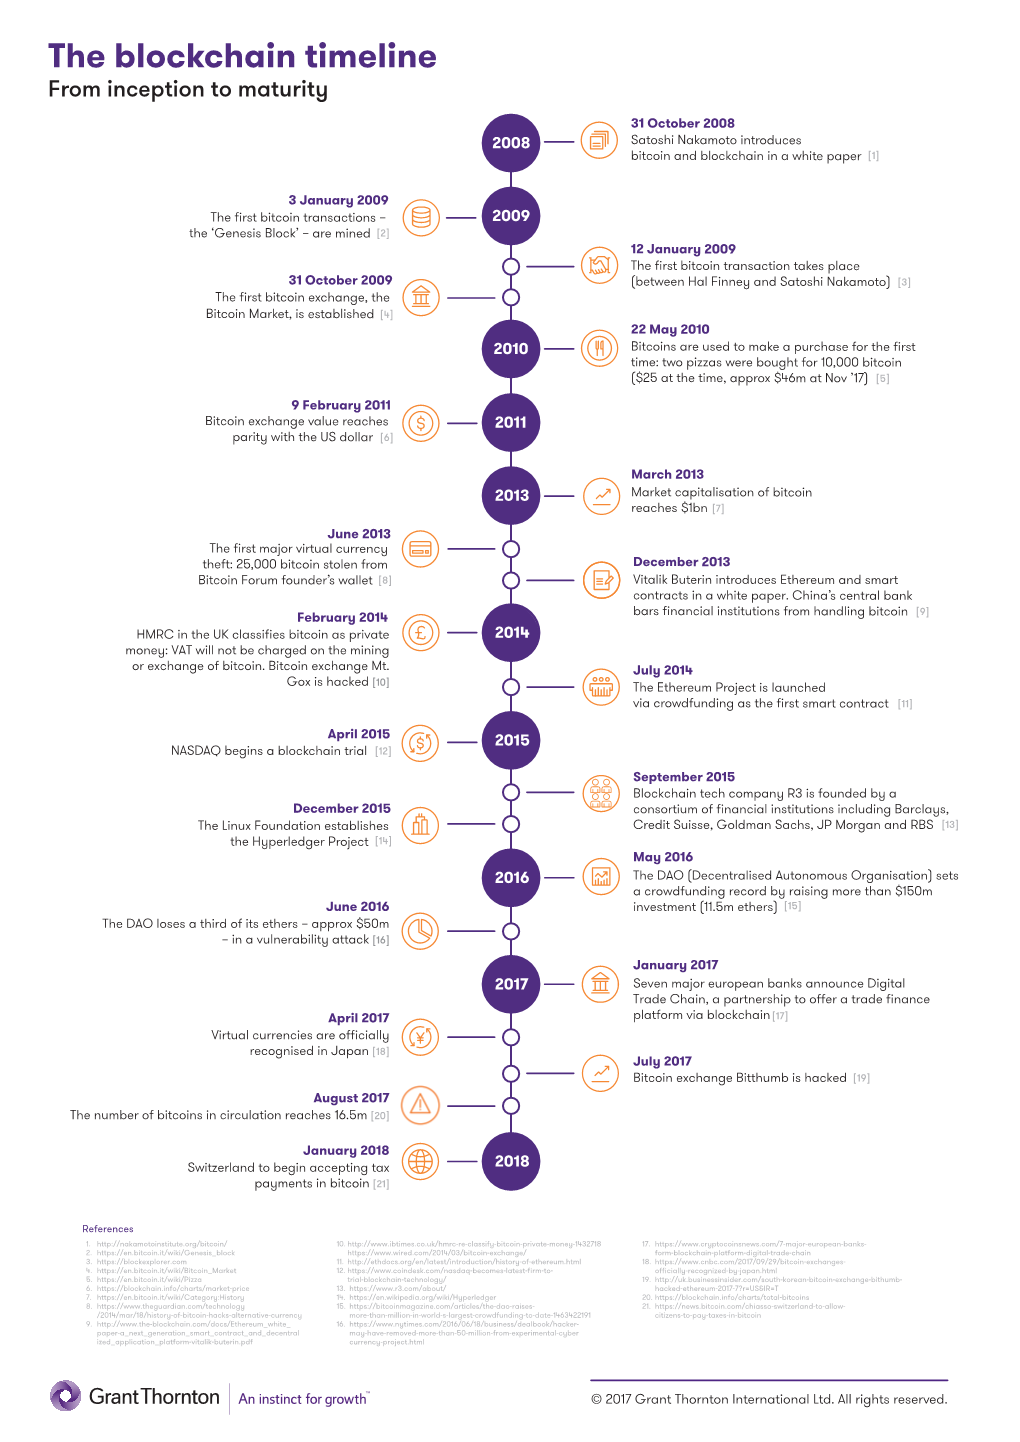 The Blockchain Timeline from Inception to Maturity